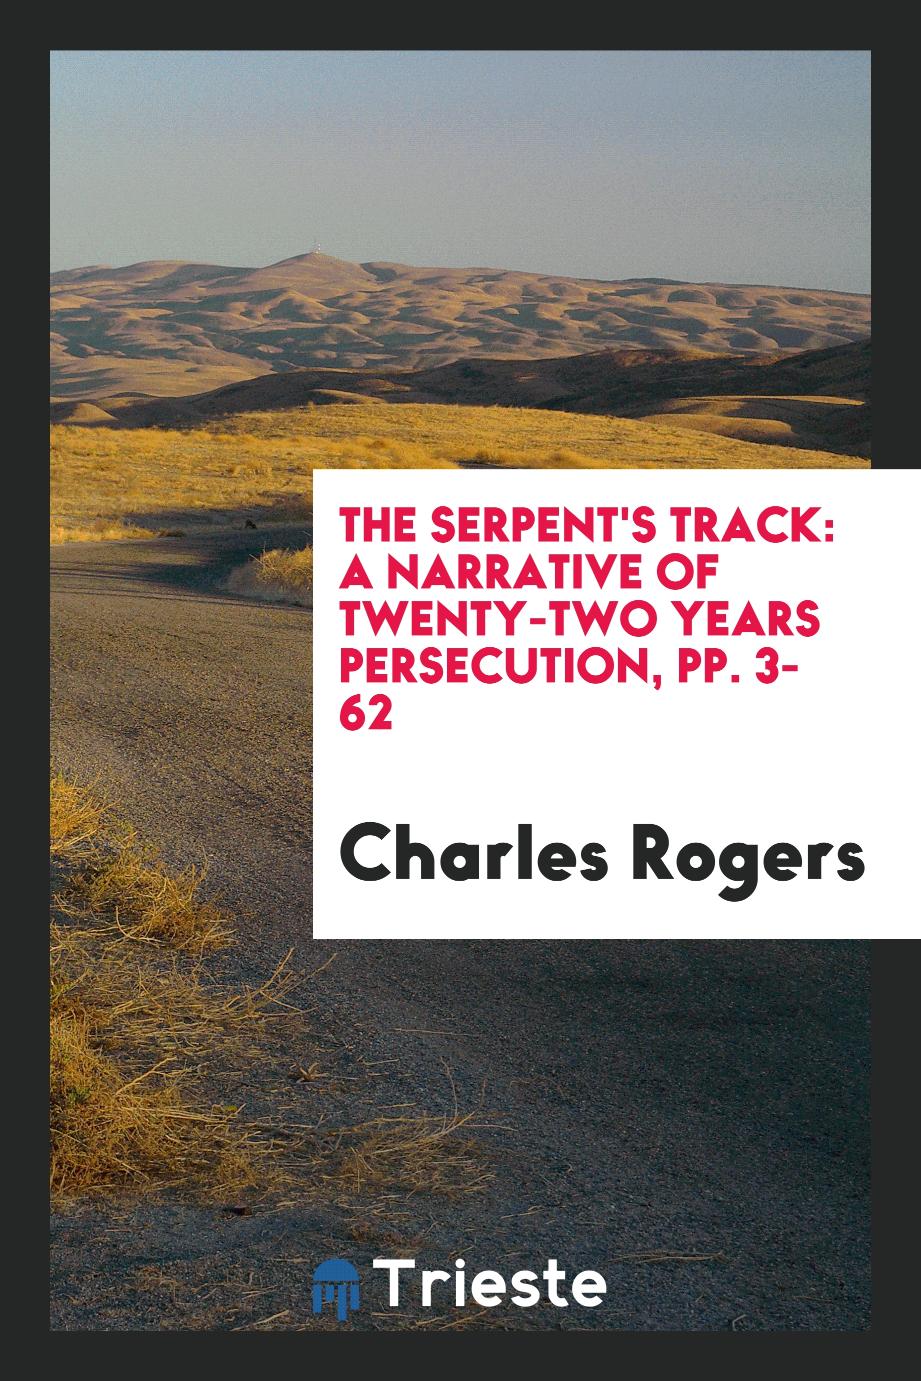 The Serpent's Track: A Narrative of Twenty-two Years Persecution, pp. 3-62